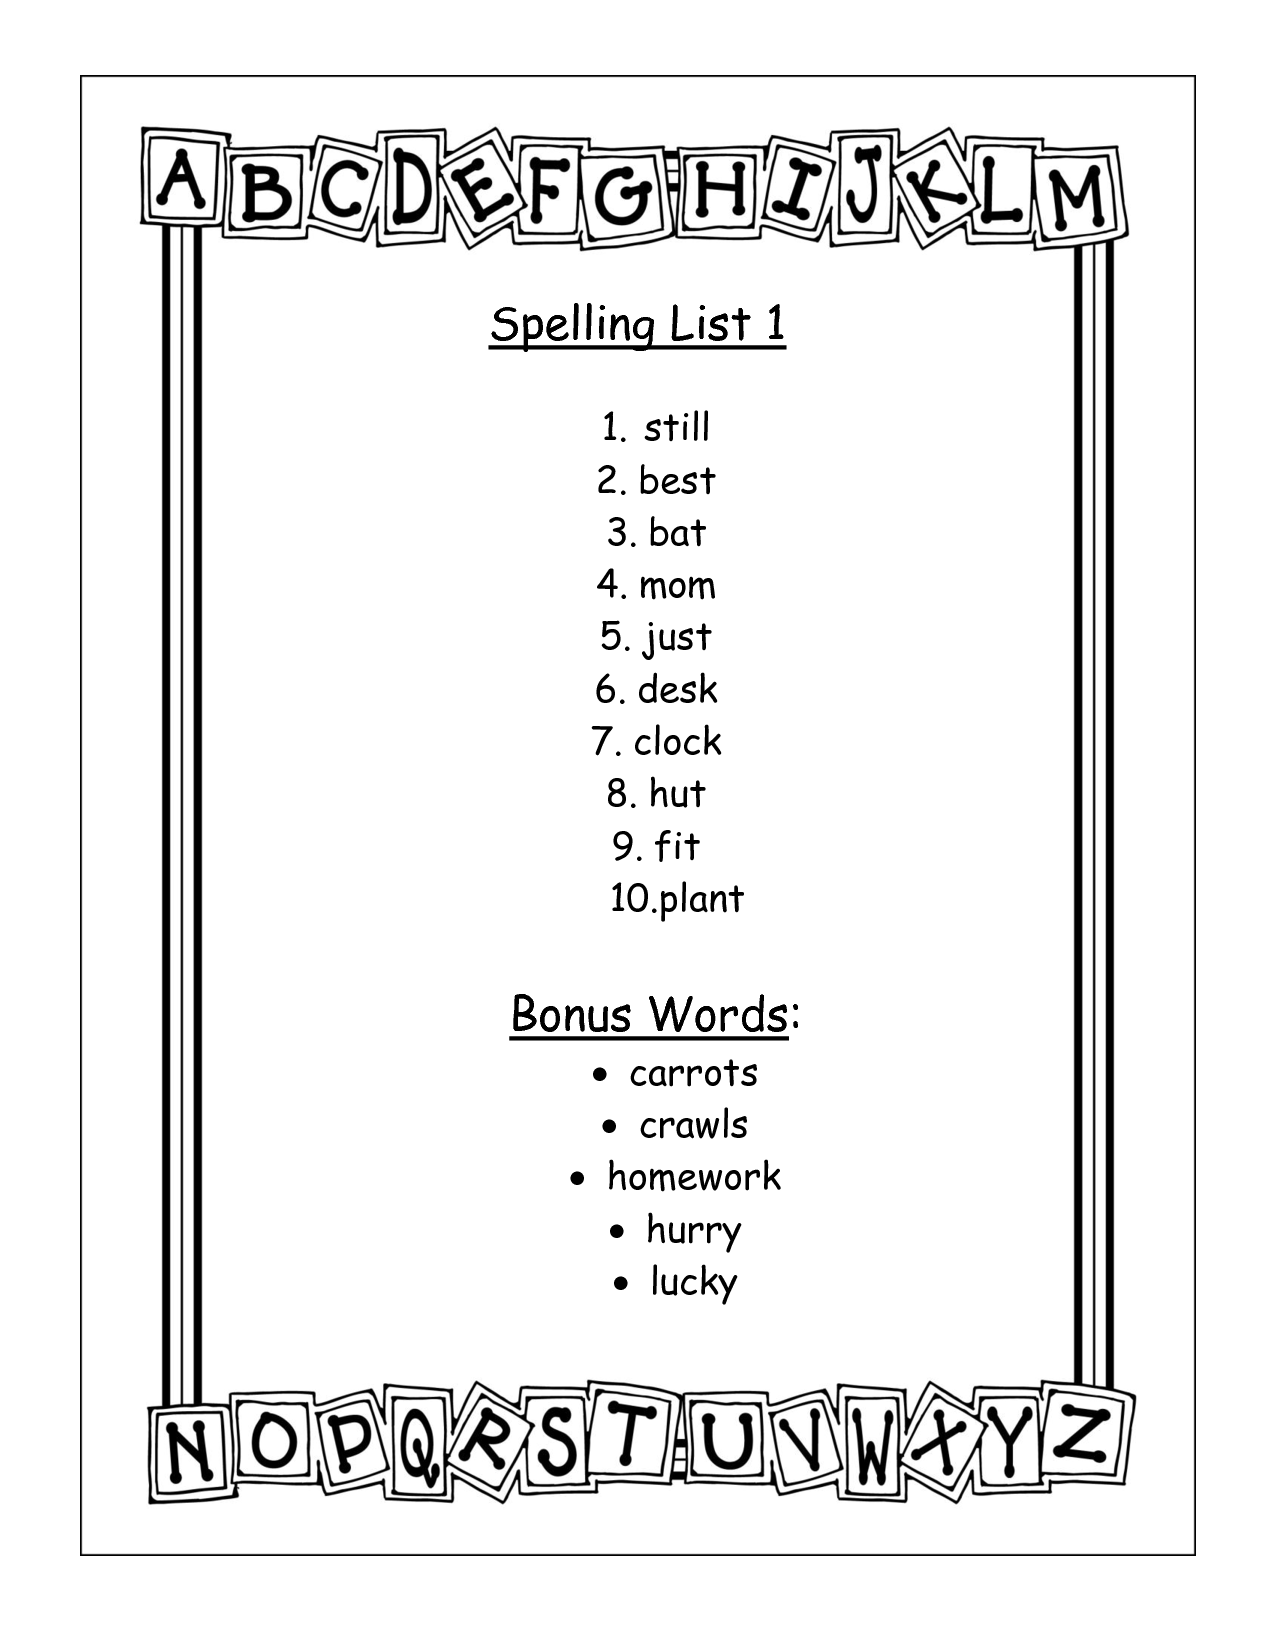 16 Best Images of Caterpillar Number Worksheets - Very ...